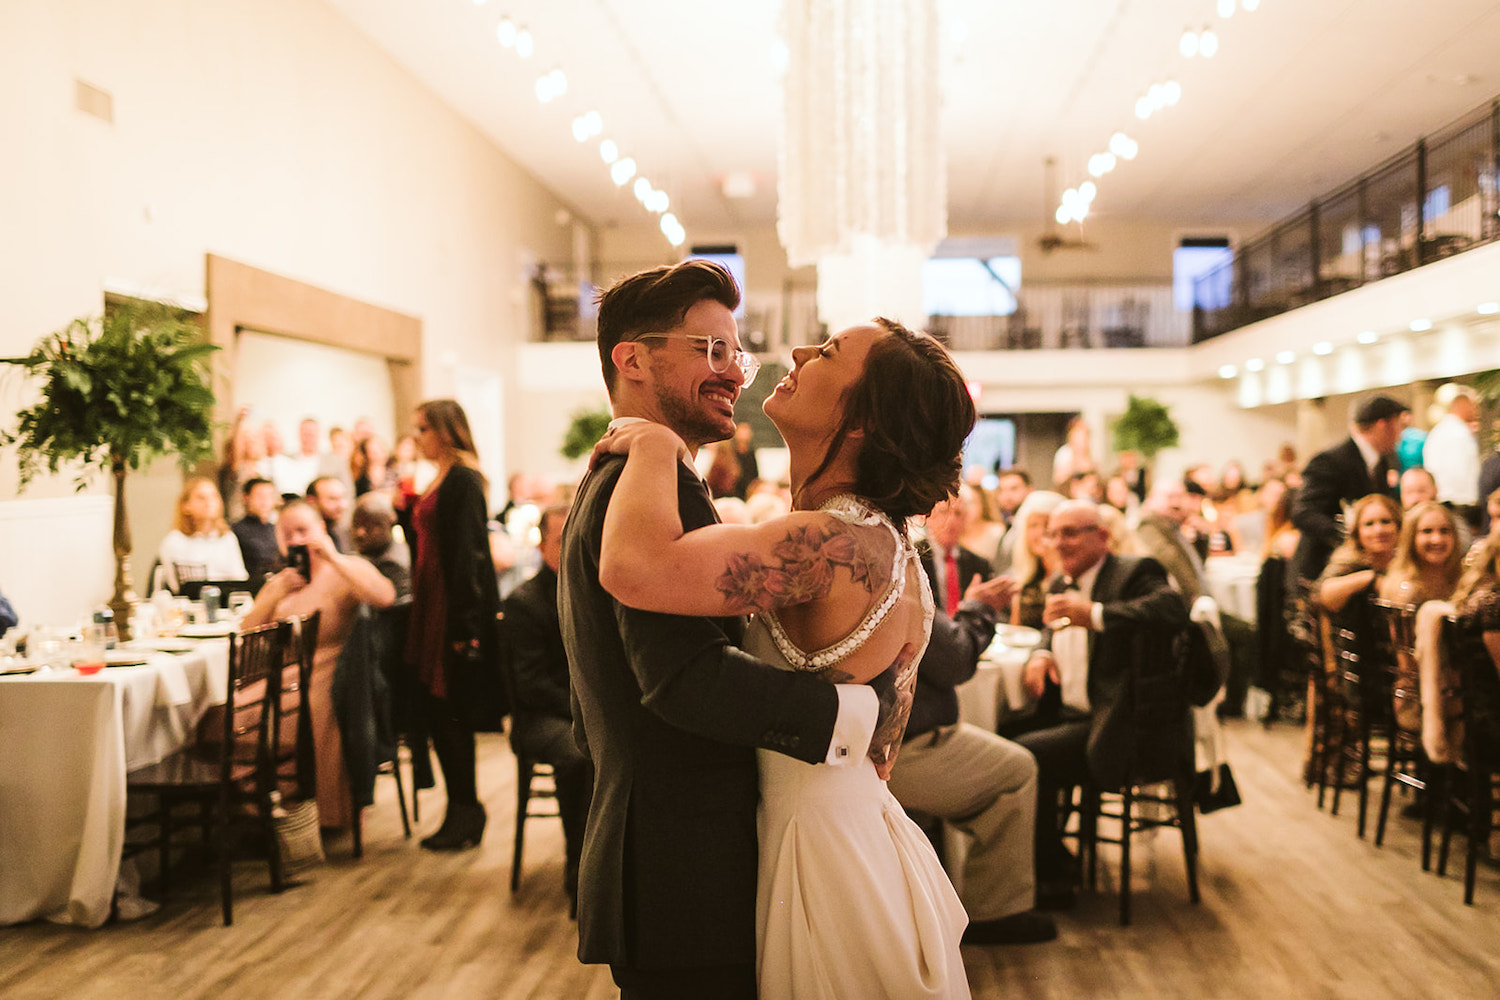 bride throws her chin back as she laughs while she and groom dance together as wedding guests watch